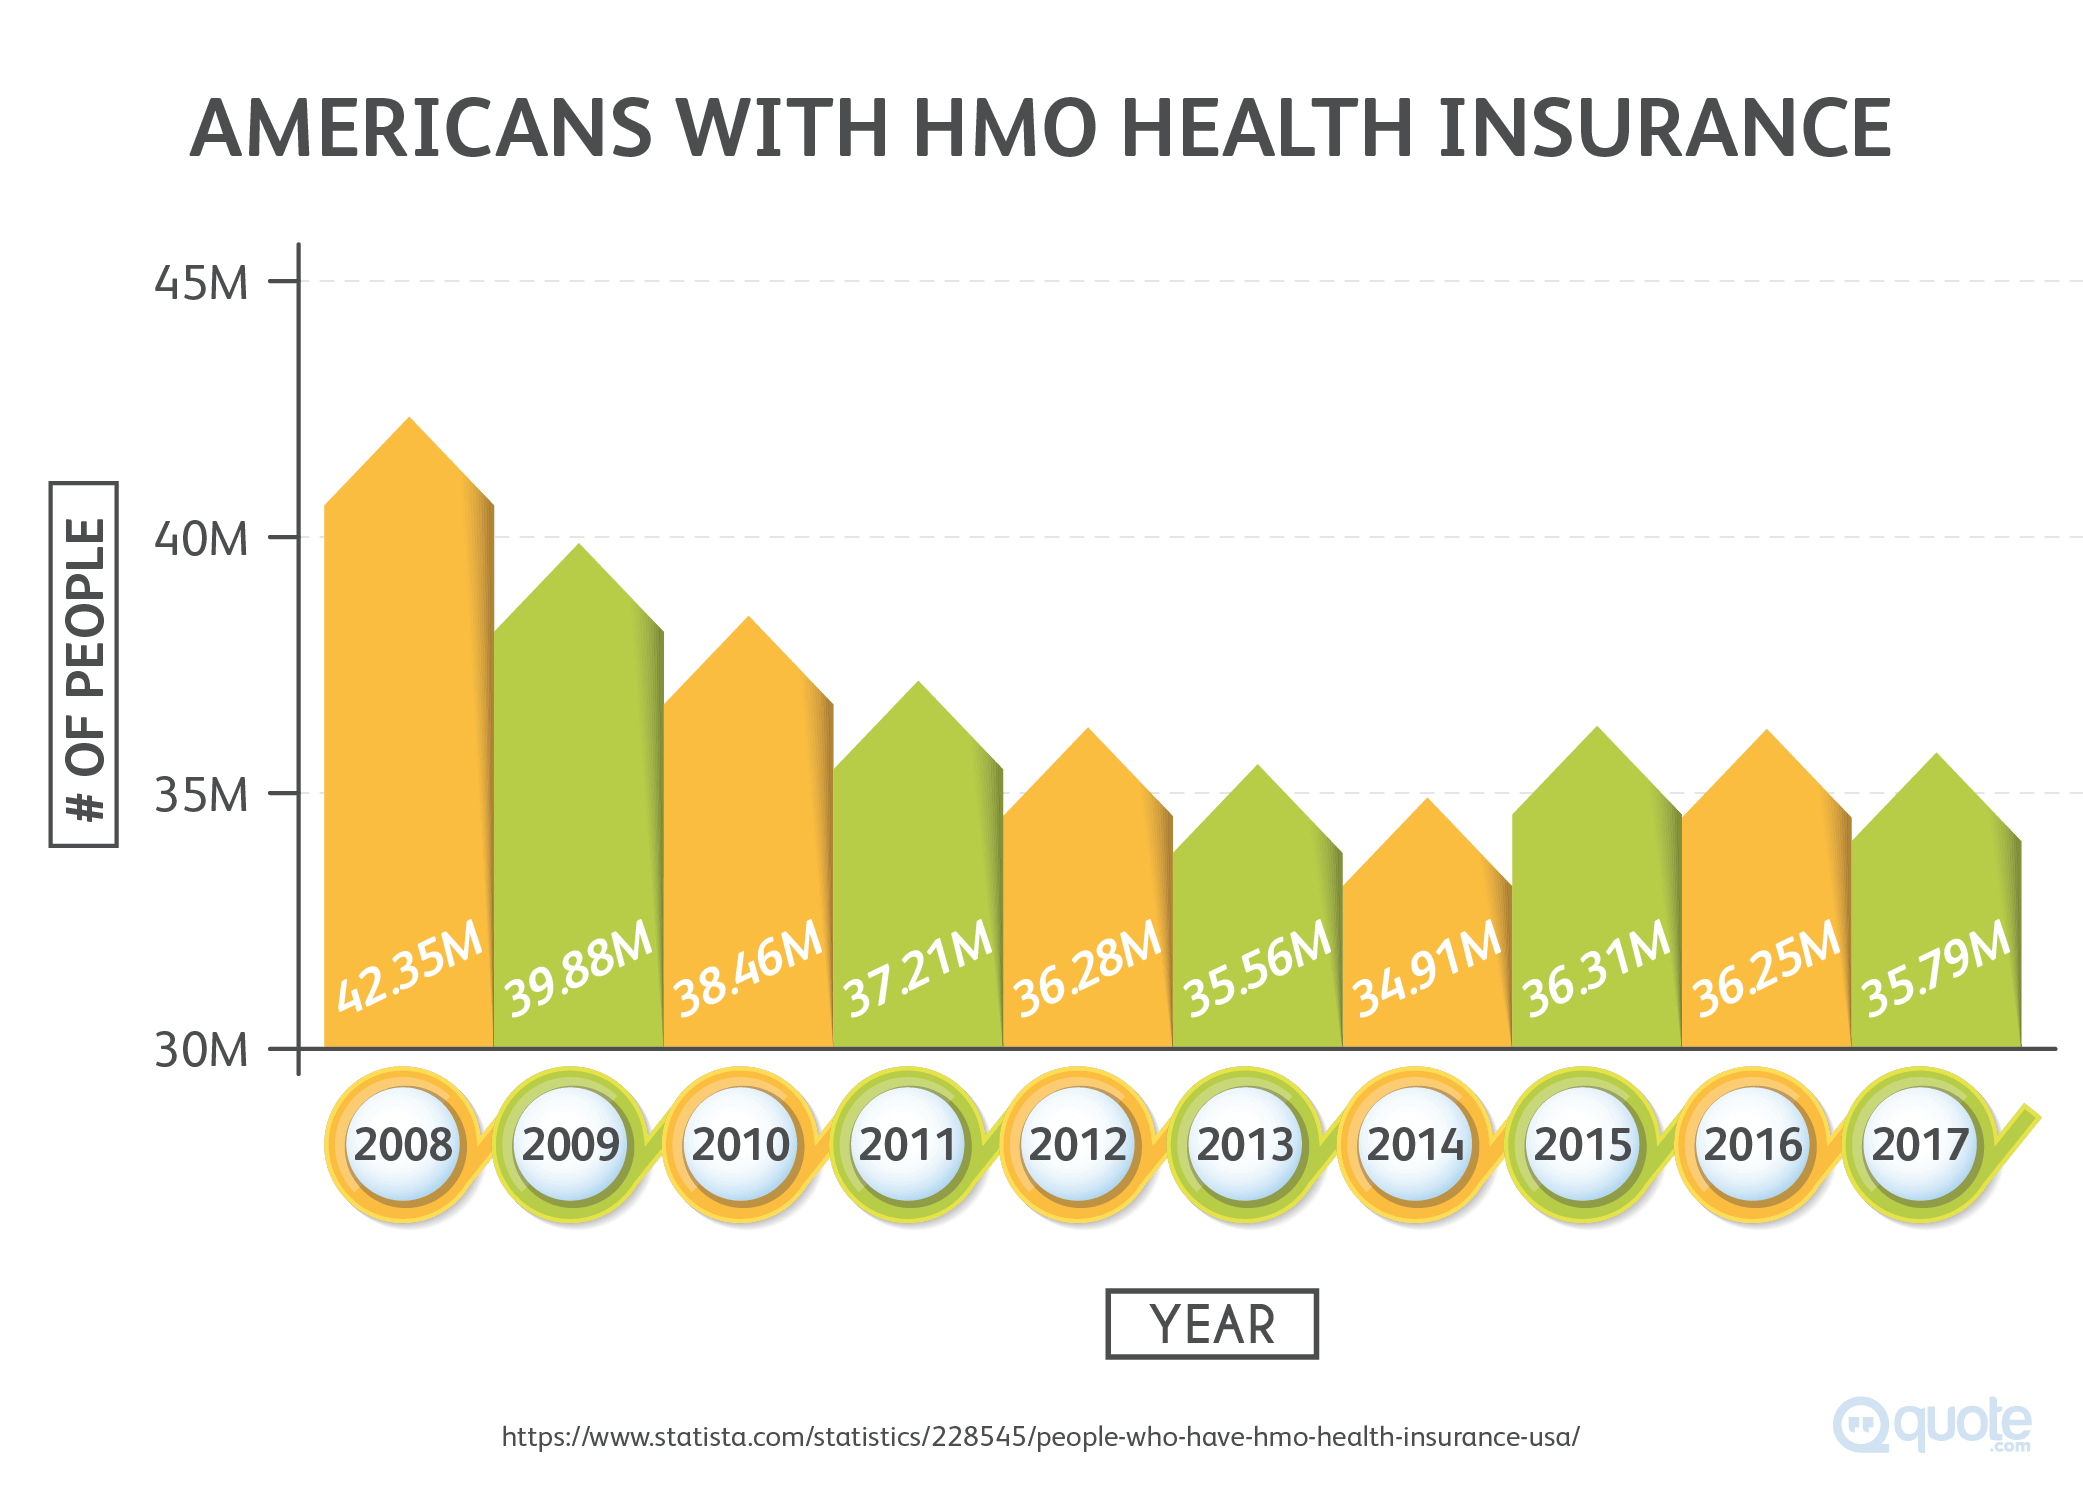 Americans With HMO Health Insurance from 2008-2017